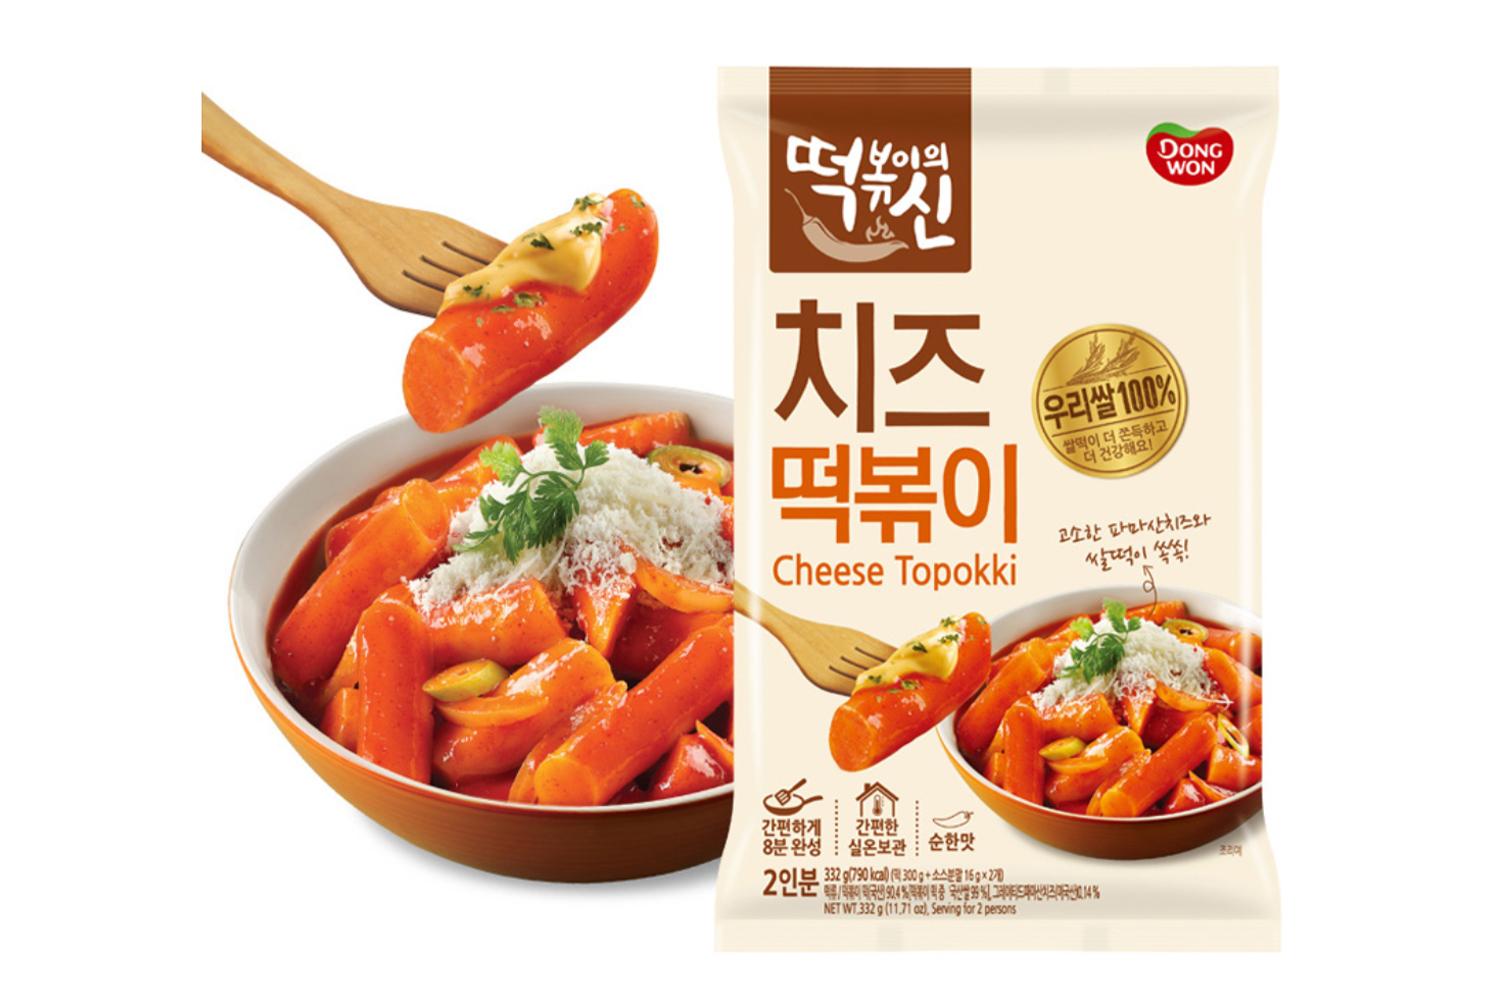 Dongwon's instant tteokbokki (spicy rice cake) dish and packaging